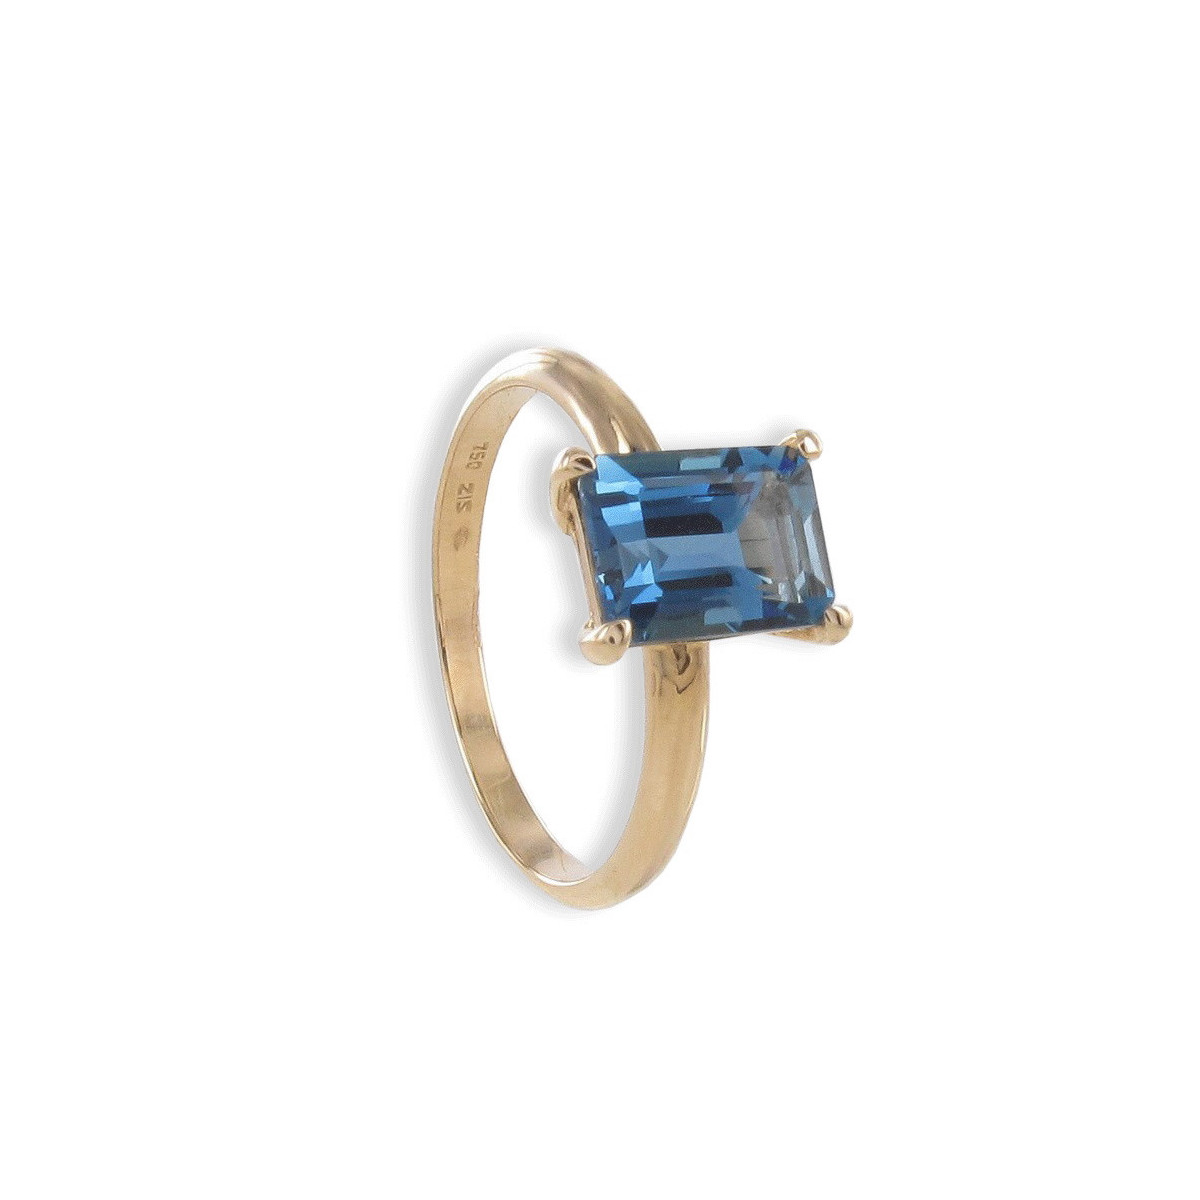 ROSE GOLD RING WITH LONDON SAPPHIRE